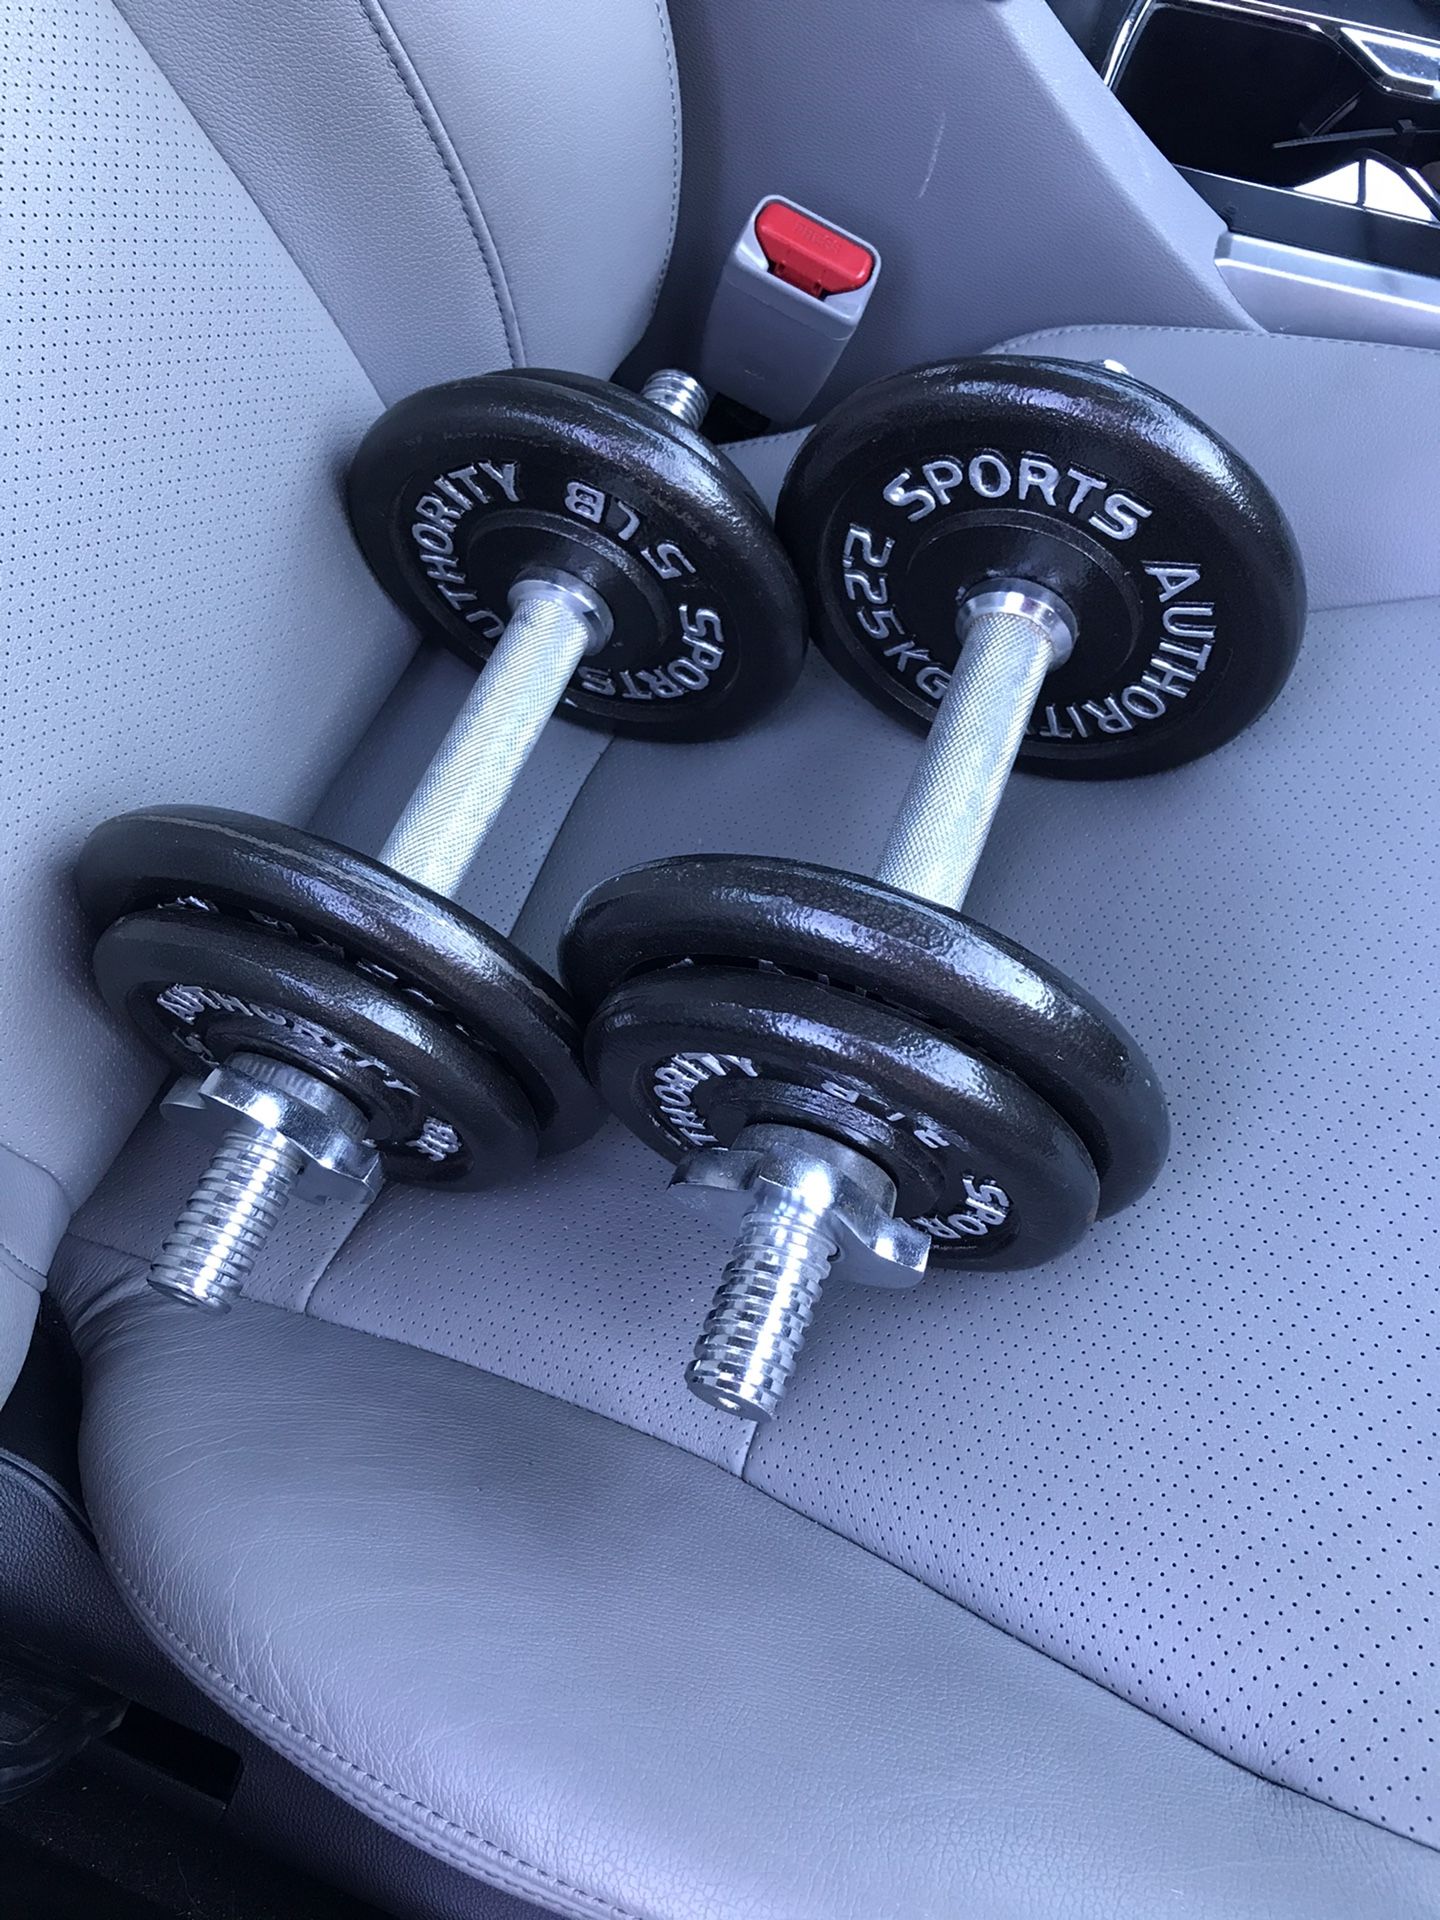 PENDING** 15 LB Dumbbell Set - Beautiful Condition